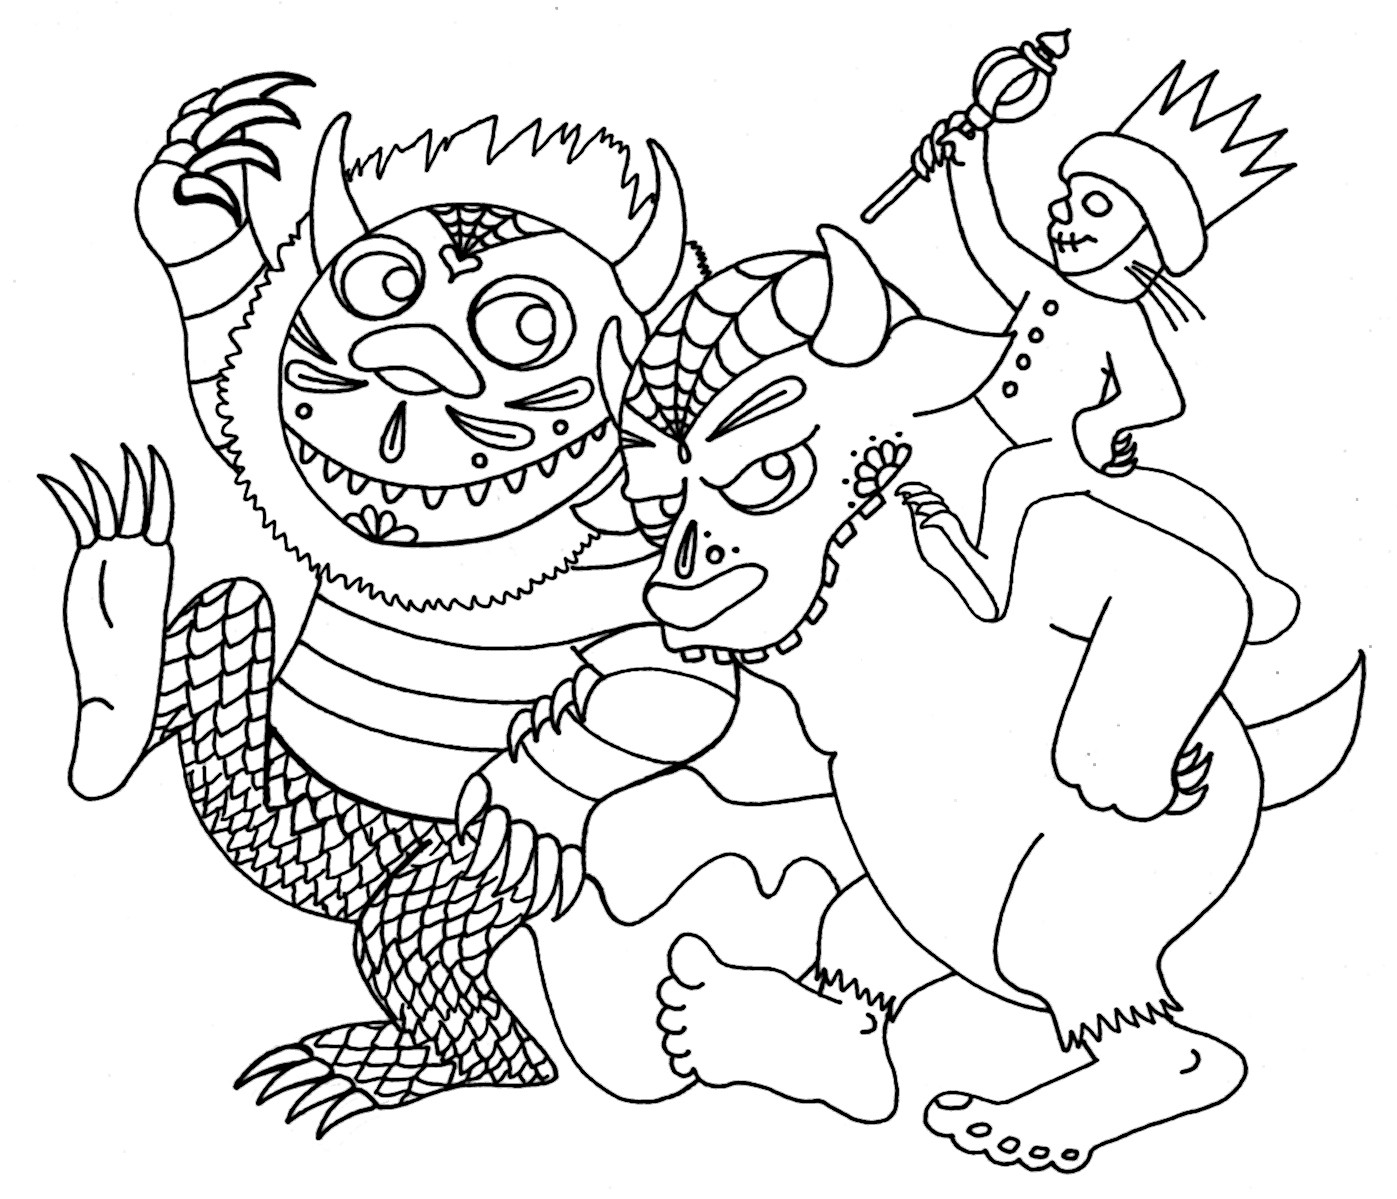 Where The Wild Things Are Free Coloring Sheets
 Yucca Flats N M May 2012